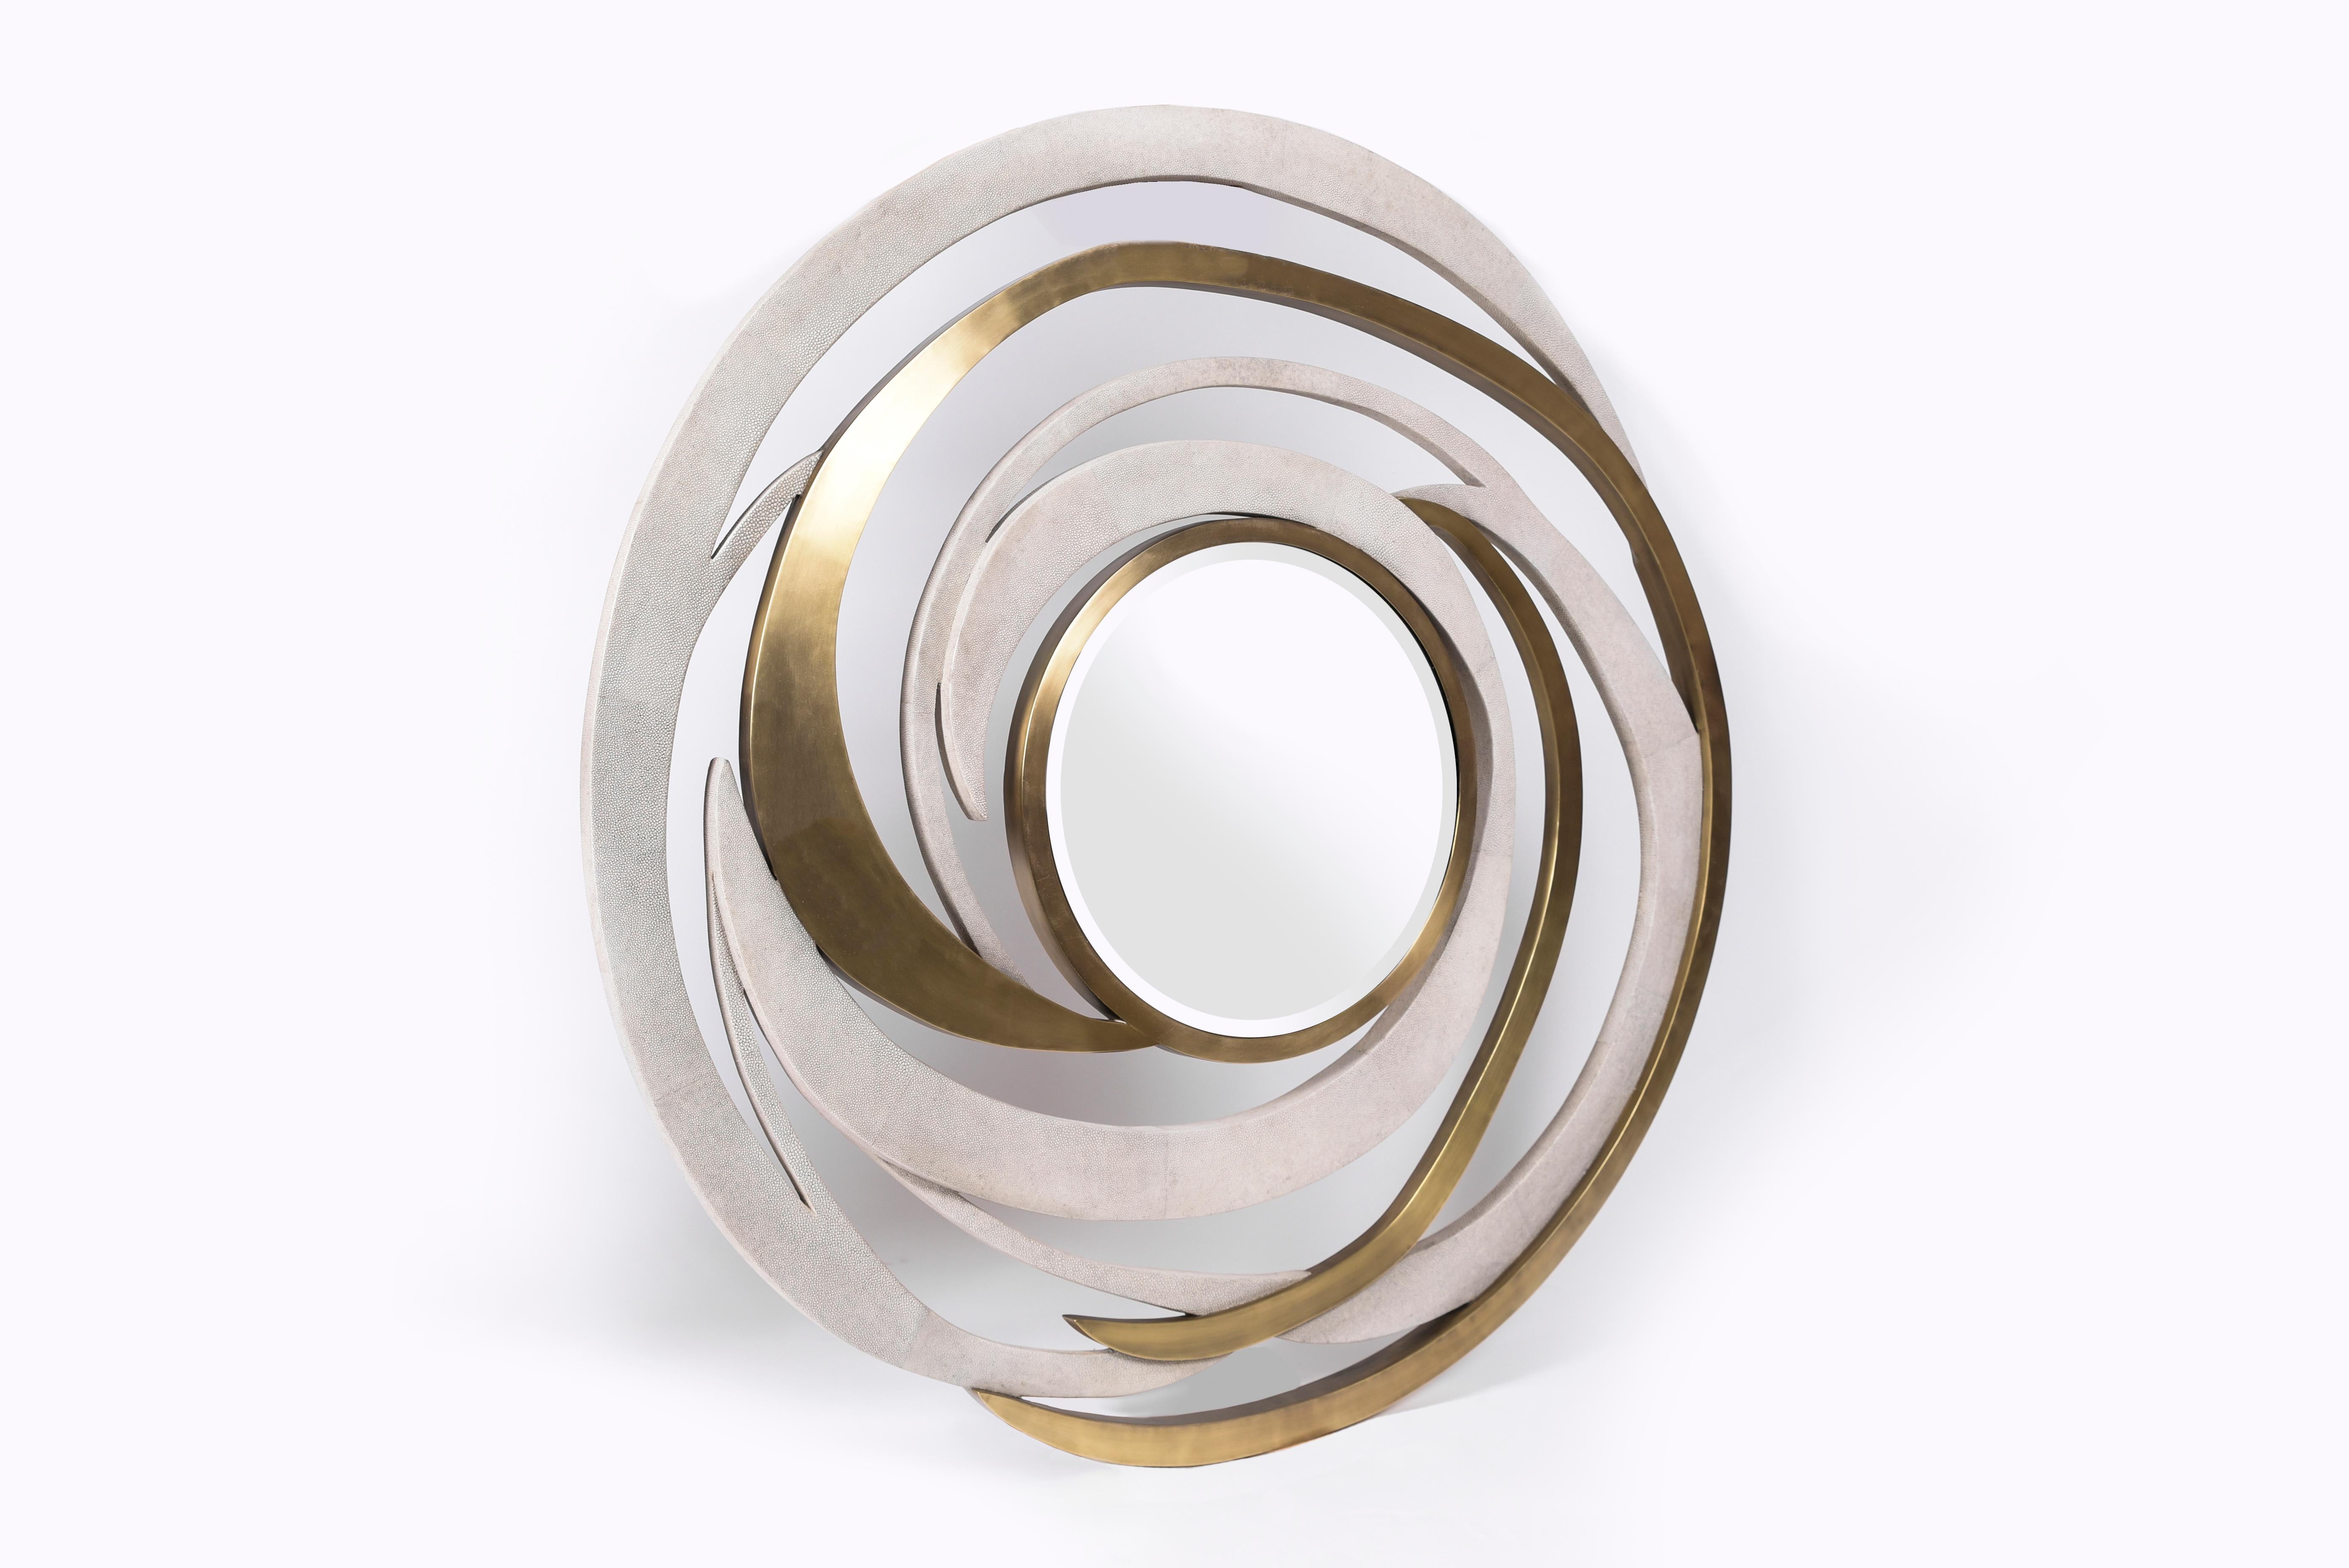 The galactic pattern mirror is a statement piece with its celestial inspired roots. The mixture of cream shagreen and bronze-patina brass on each ring creates a graphic quality to the overall piece, while retaining a whimsical feel. The shagreen is